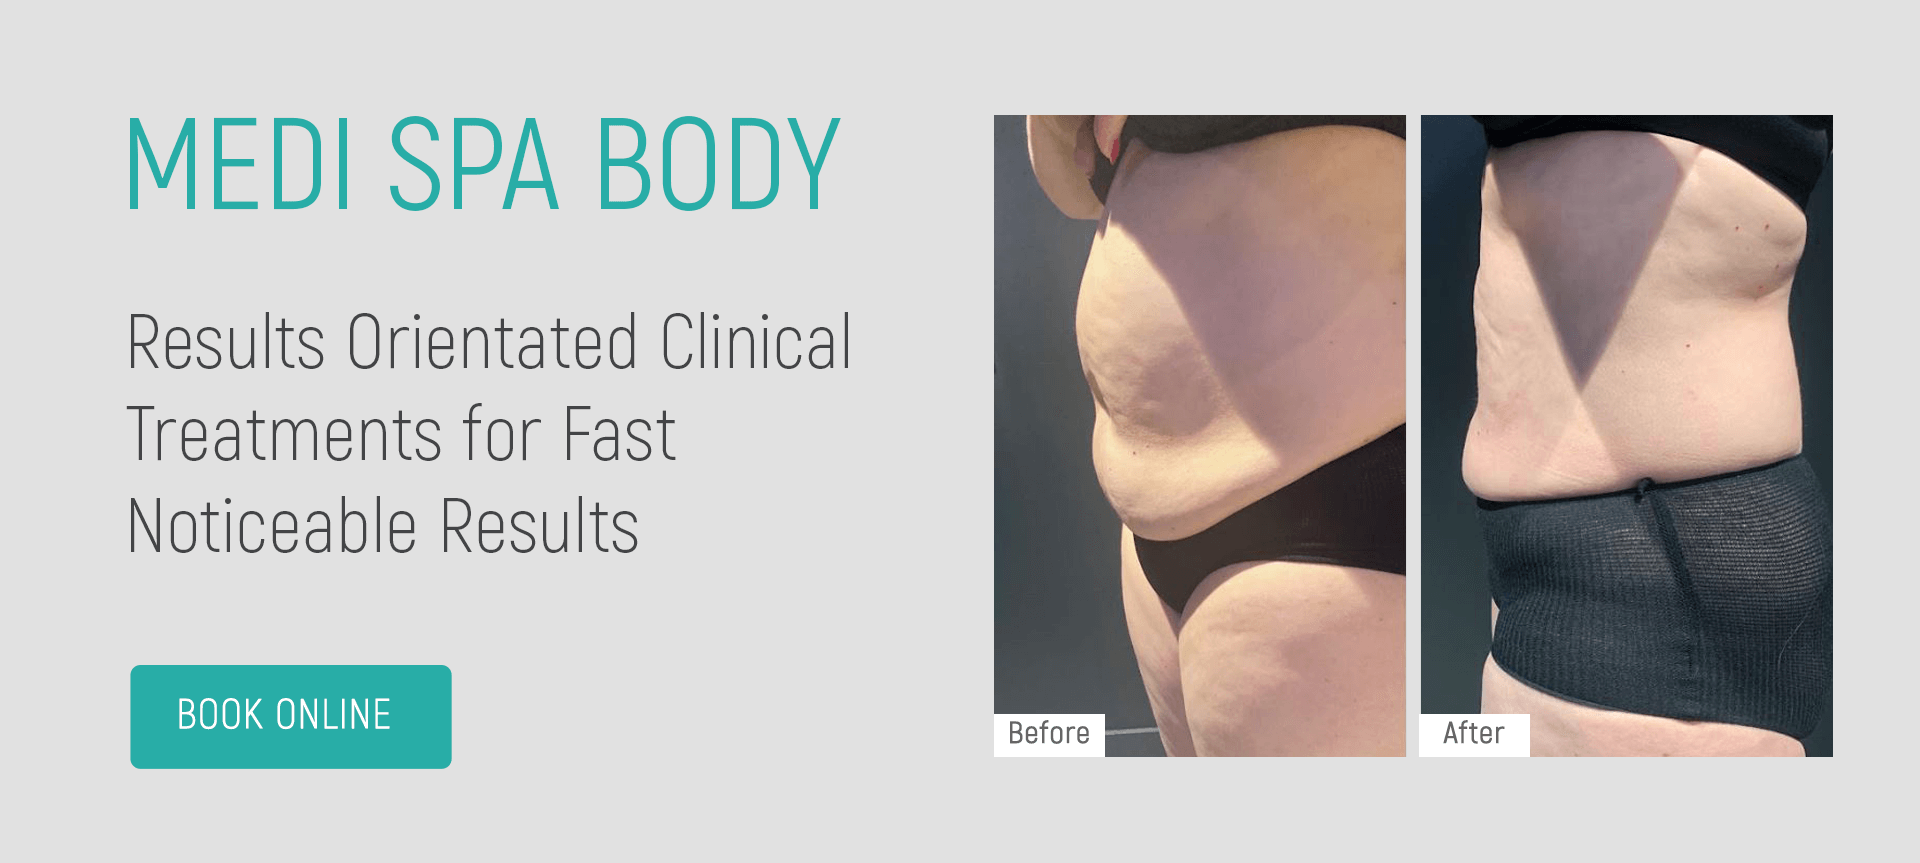 When is the Perfect Time for Body Contouring? - Just Melt Med Spa